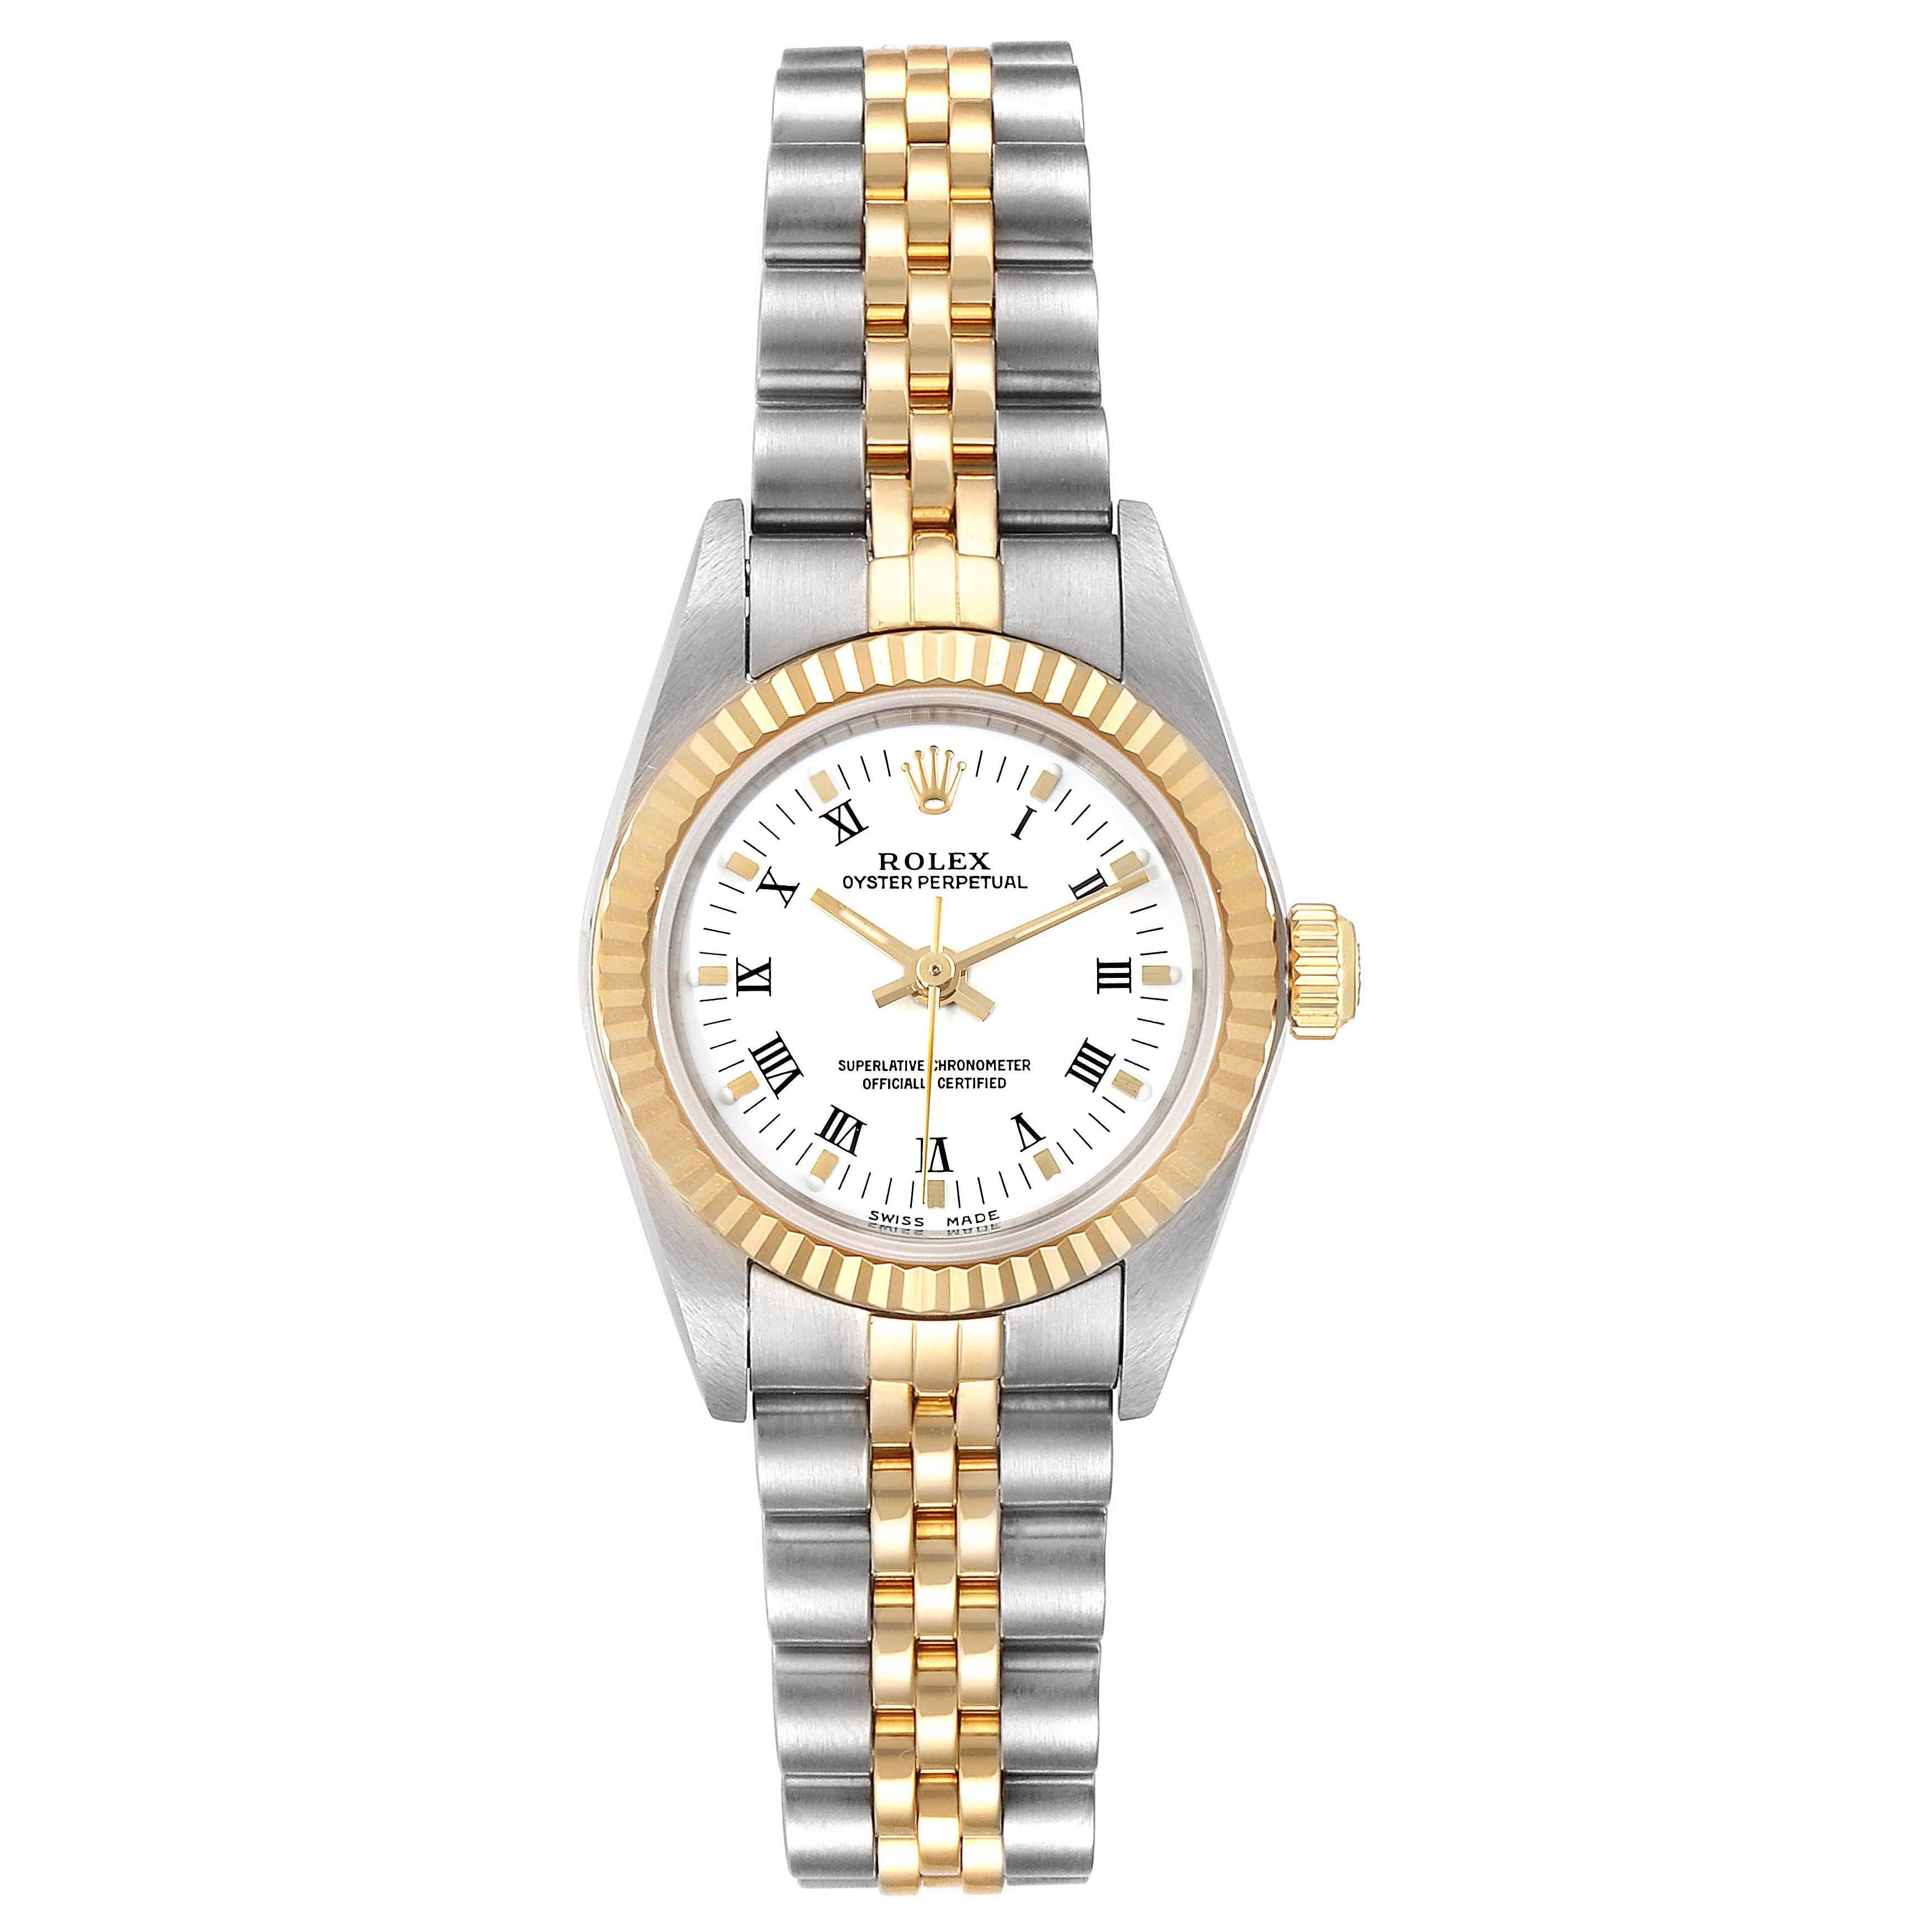 Rolex Oyster Perpetual NonDate Ladies Steel Yellow Gold Watch 76193. Officially certified chronometer self-winding movement. Stainless steel oyster case 24.0 mm in diameter. Rolex logo on a 18k yellow gold crown. 18k yellow gold fluted bezel.